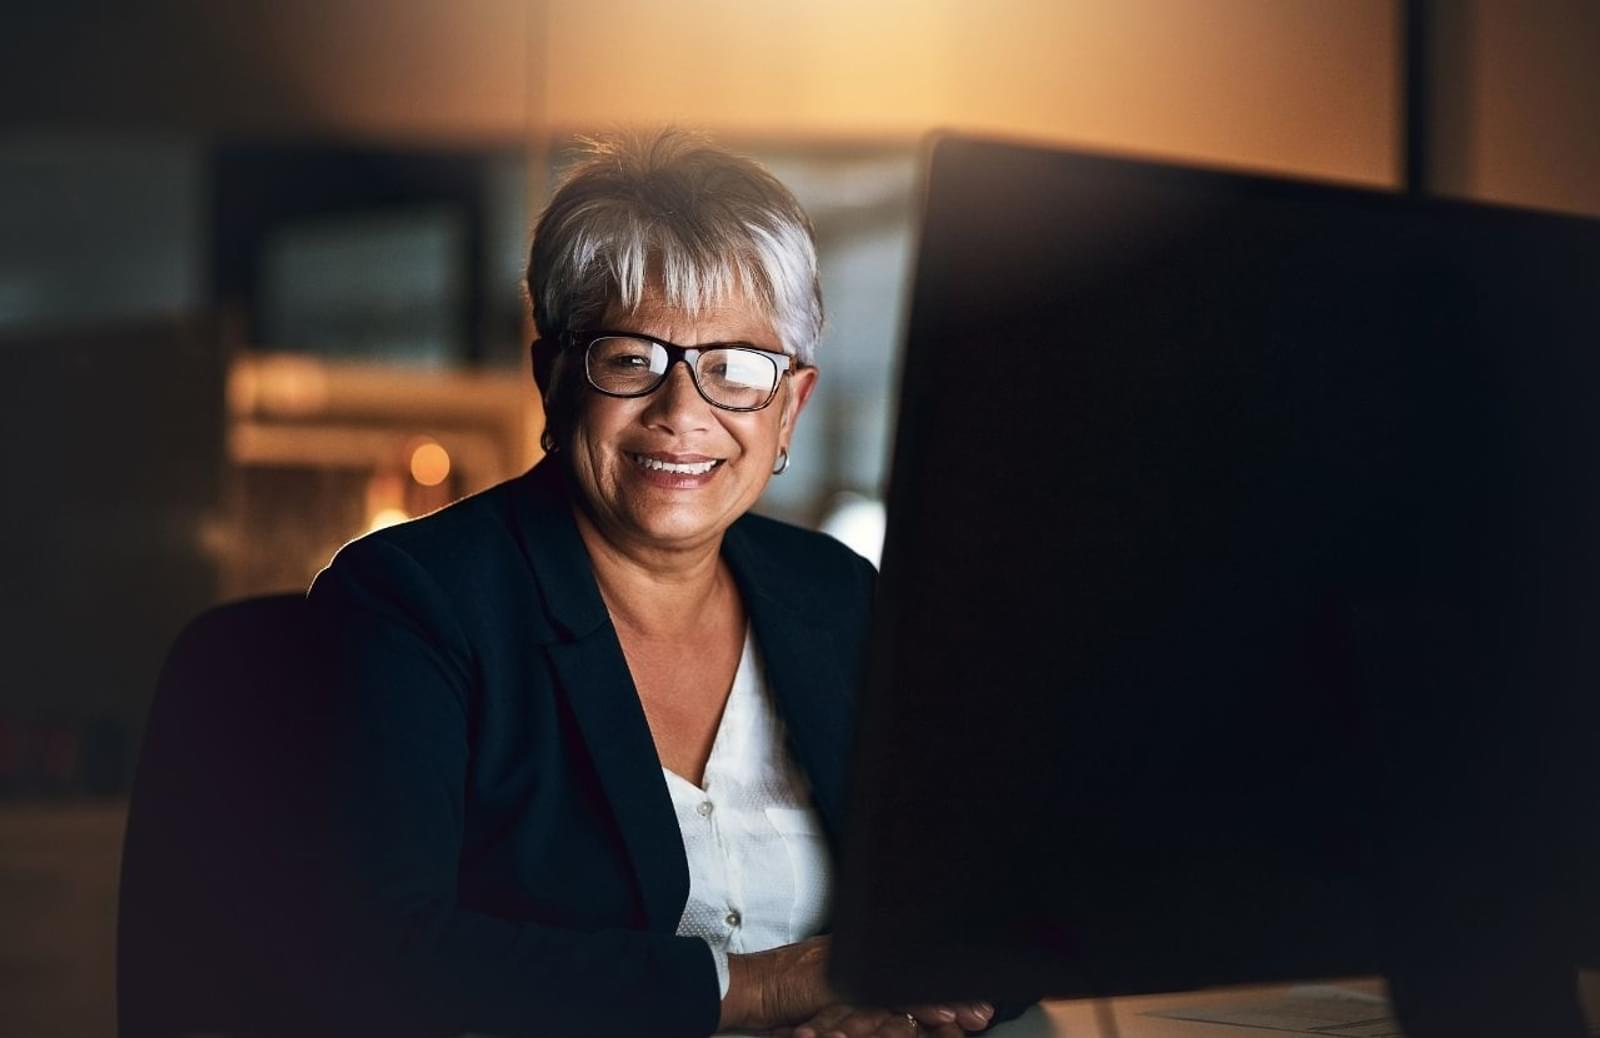 Woman sitting at desk smiling at camera while working on computer